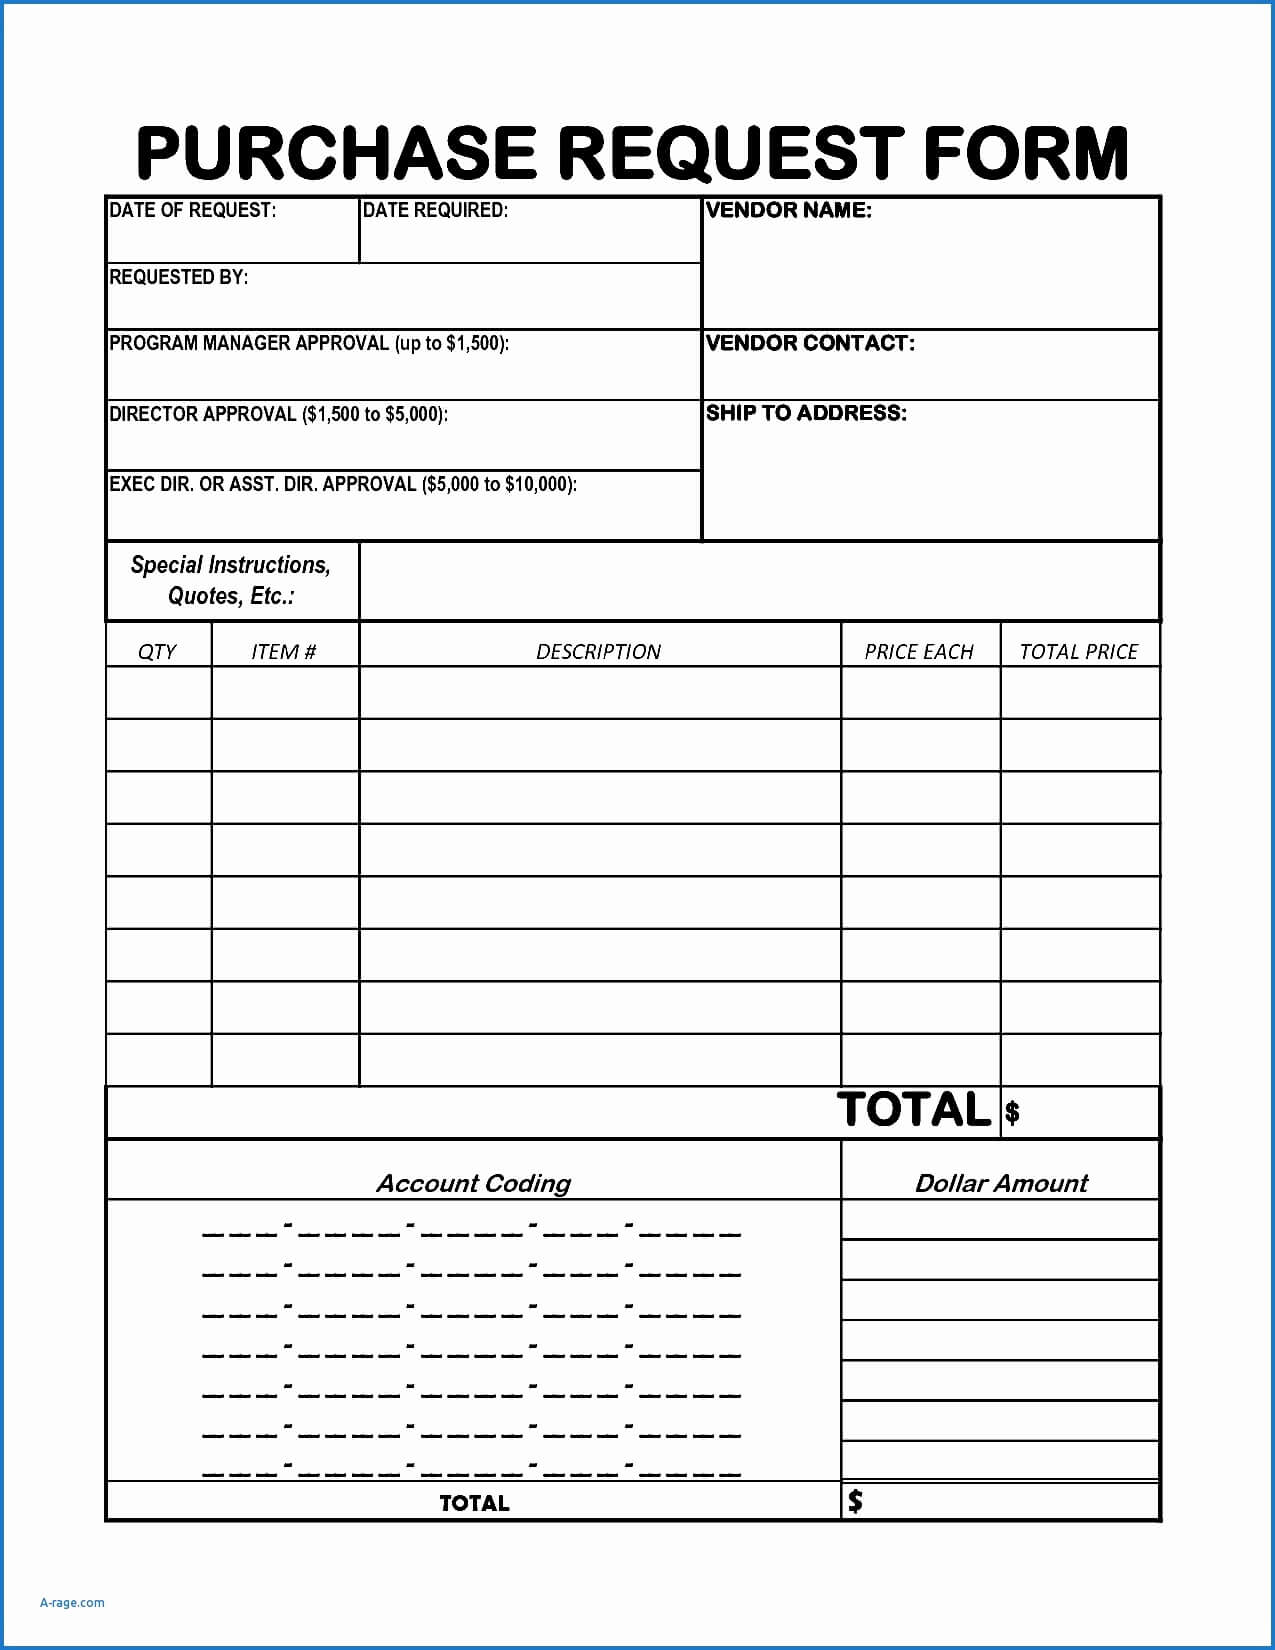 Travel Aseball Team Udget Spreadsheet Lineup Card Template Within Softball Lineup Card Template